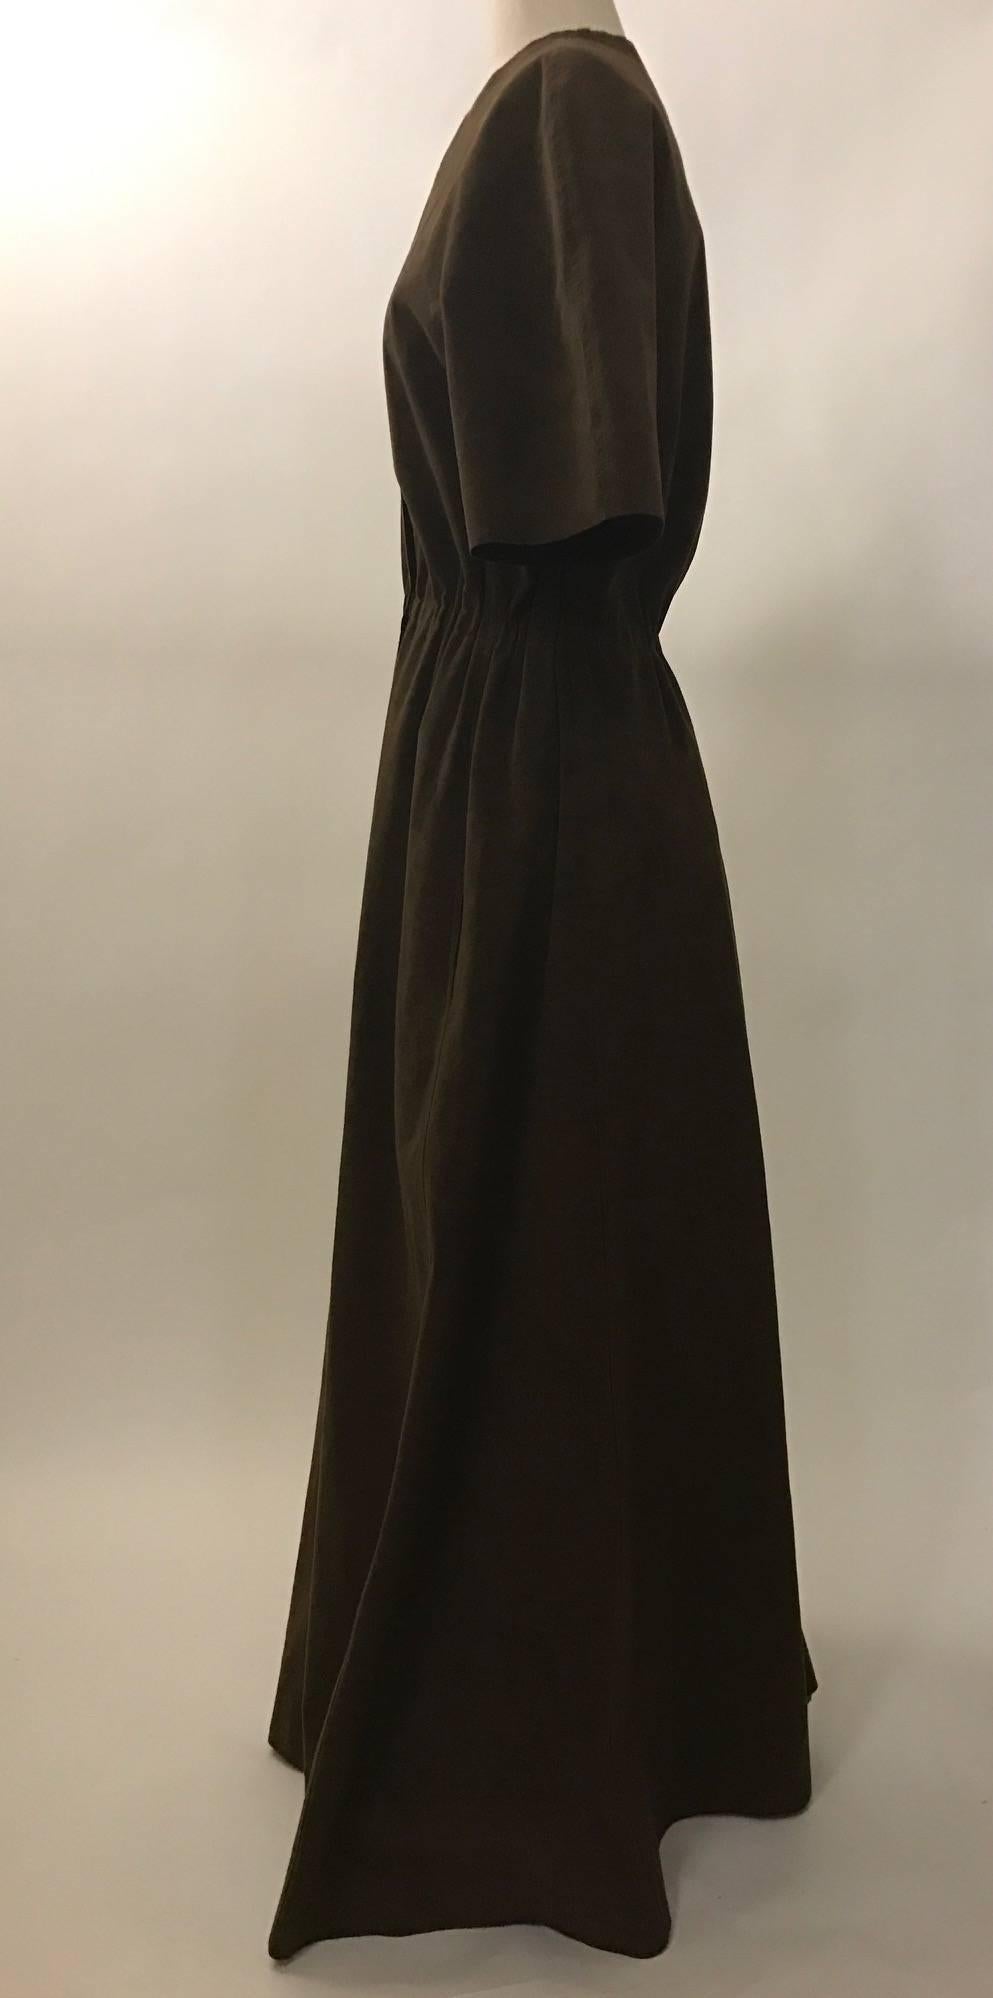 Halston 1970's brown ultra suede partial wrap dress. Fastens with hooks at elasticized waist and a snap near bust.

Ultrasuede (washable synthetic micro fiber.)

No size label, best fits a size M, but somewhat flexible. See measurements.
Bust